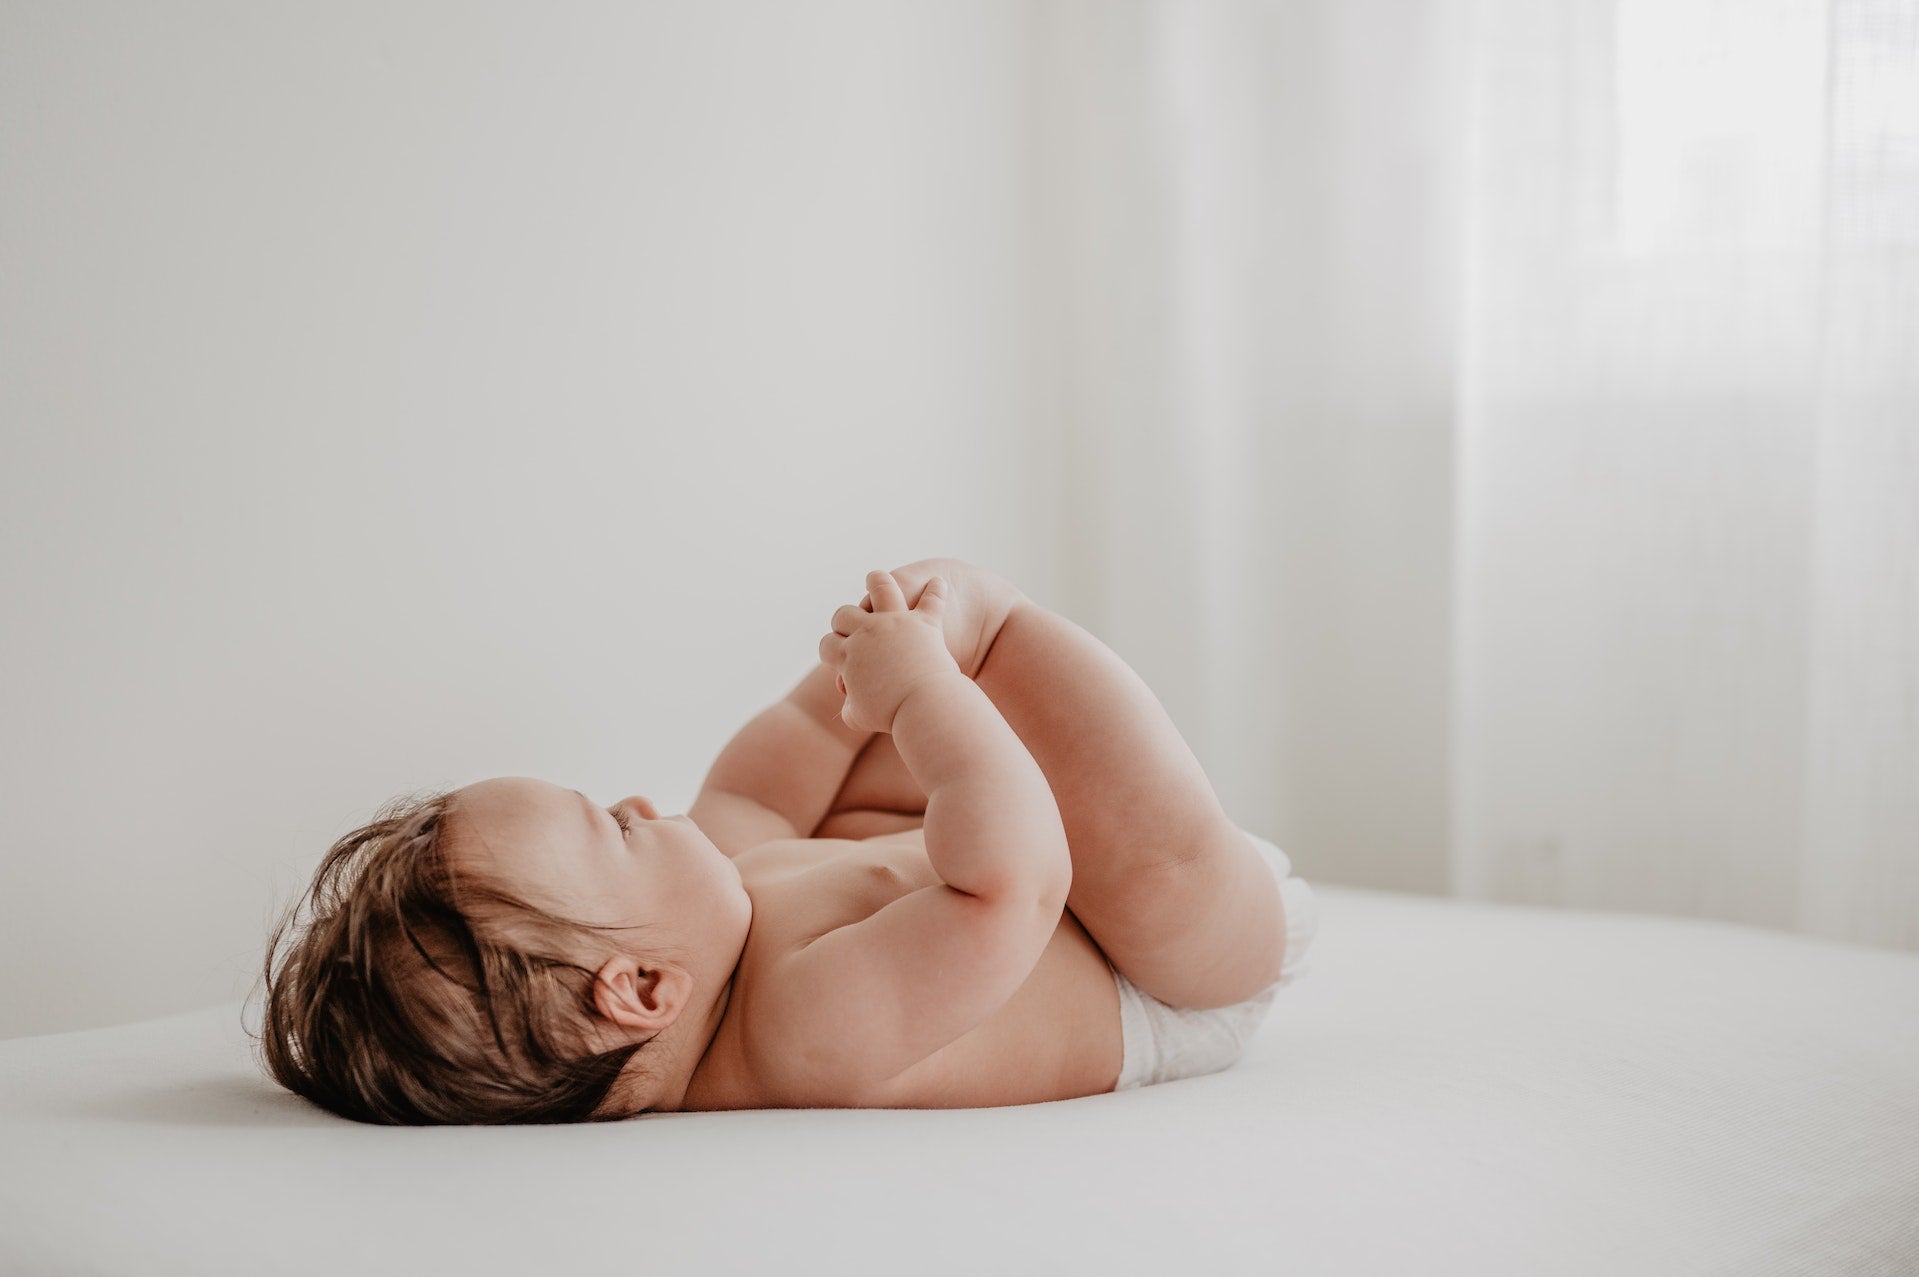 Baby in diaper plays with their feet while laying on bed